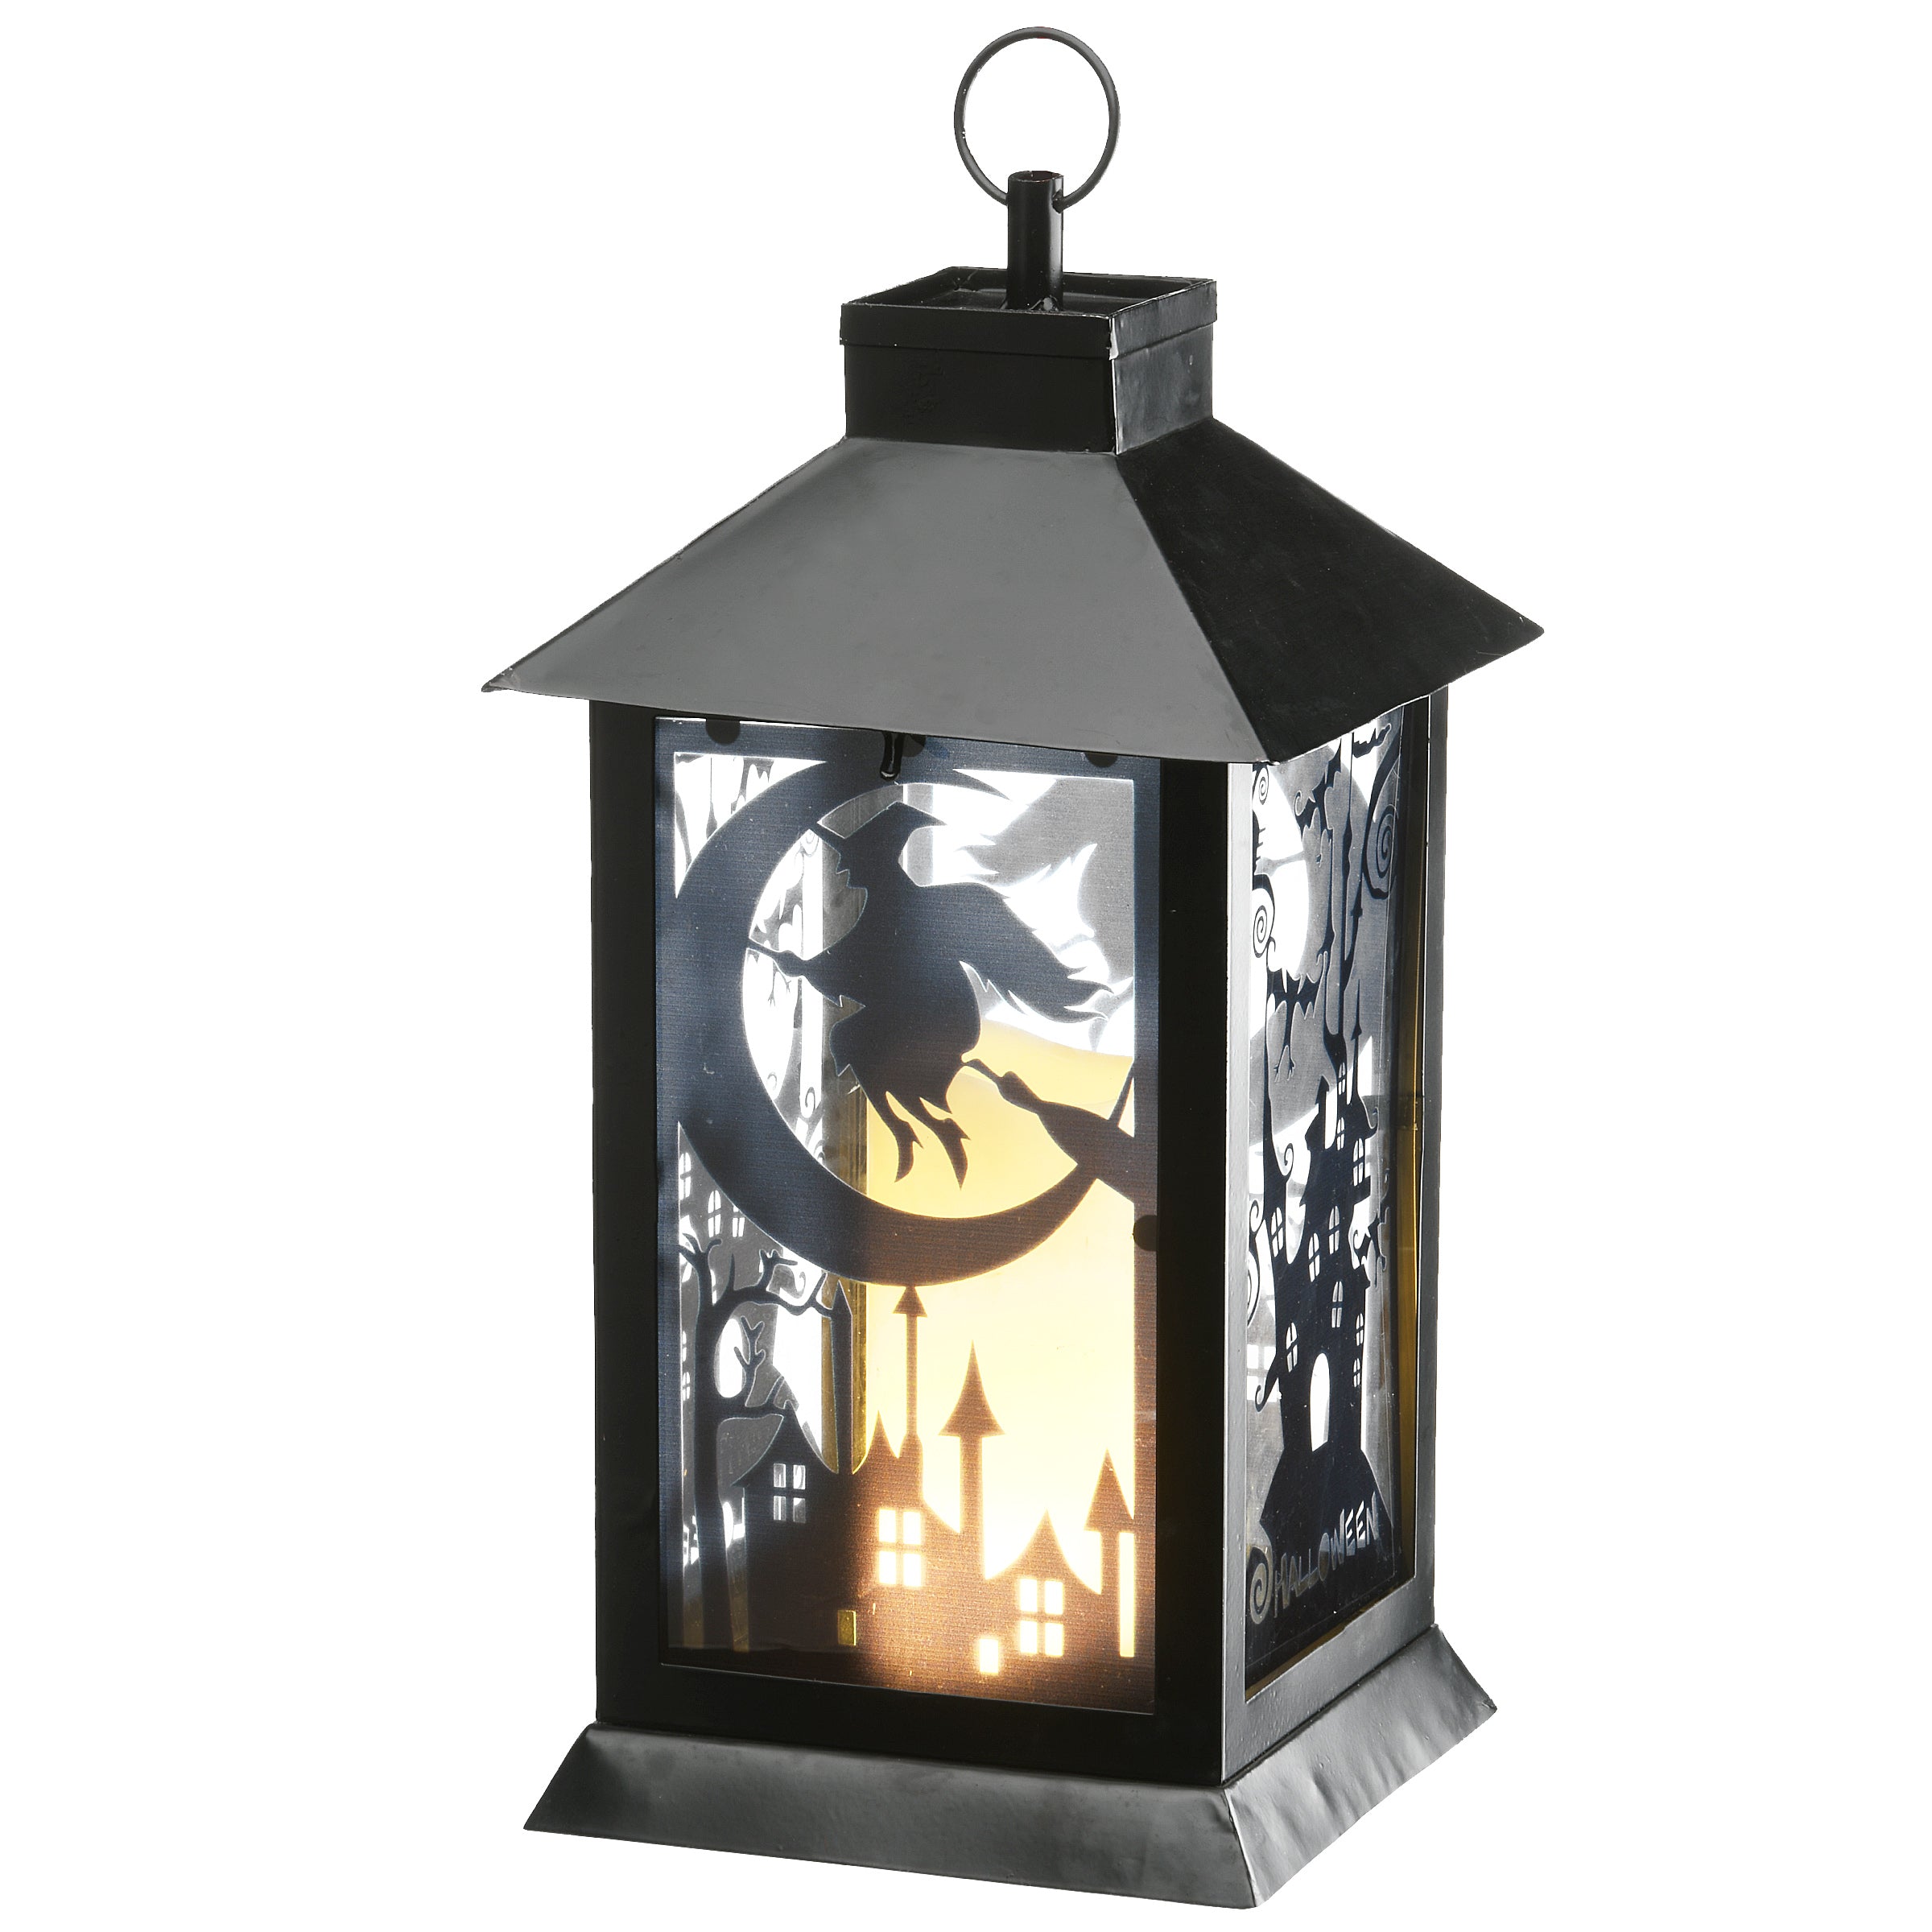 Halloween Lantern with LED Lights, Carved Images of Witches and Cobwebs, 16 inches